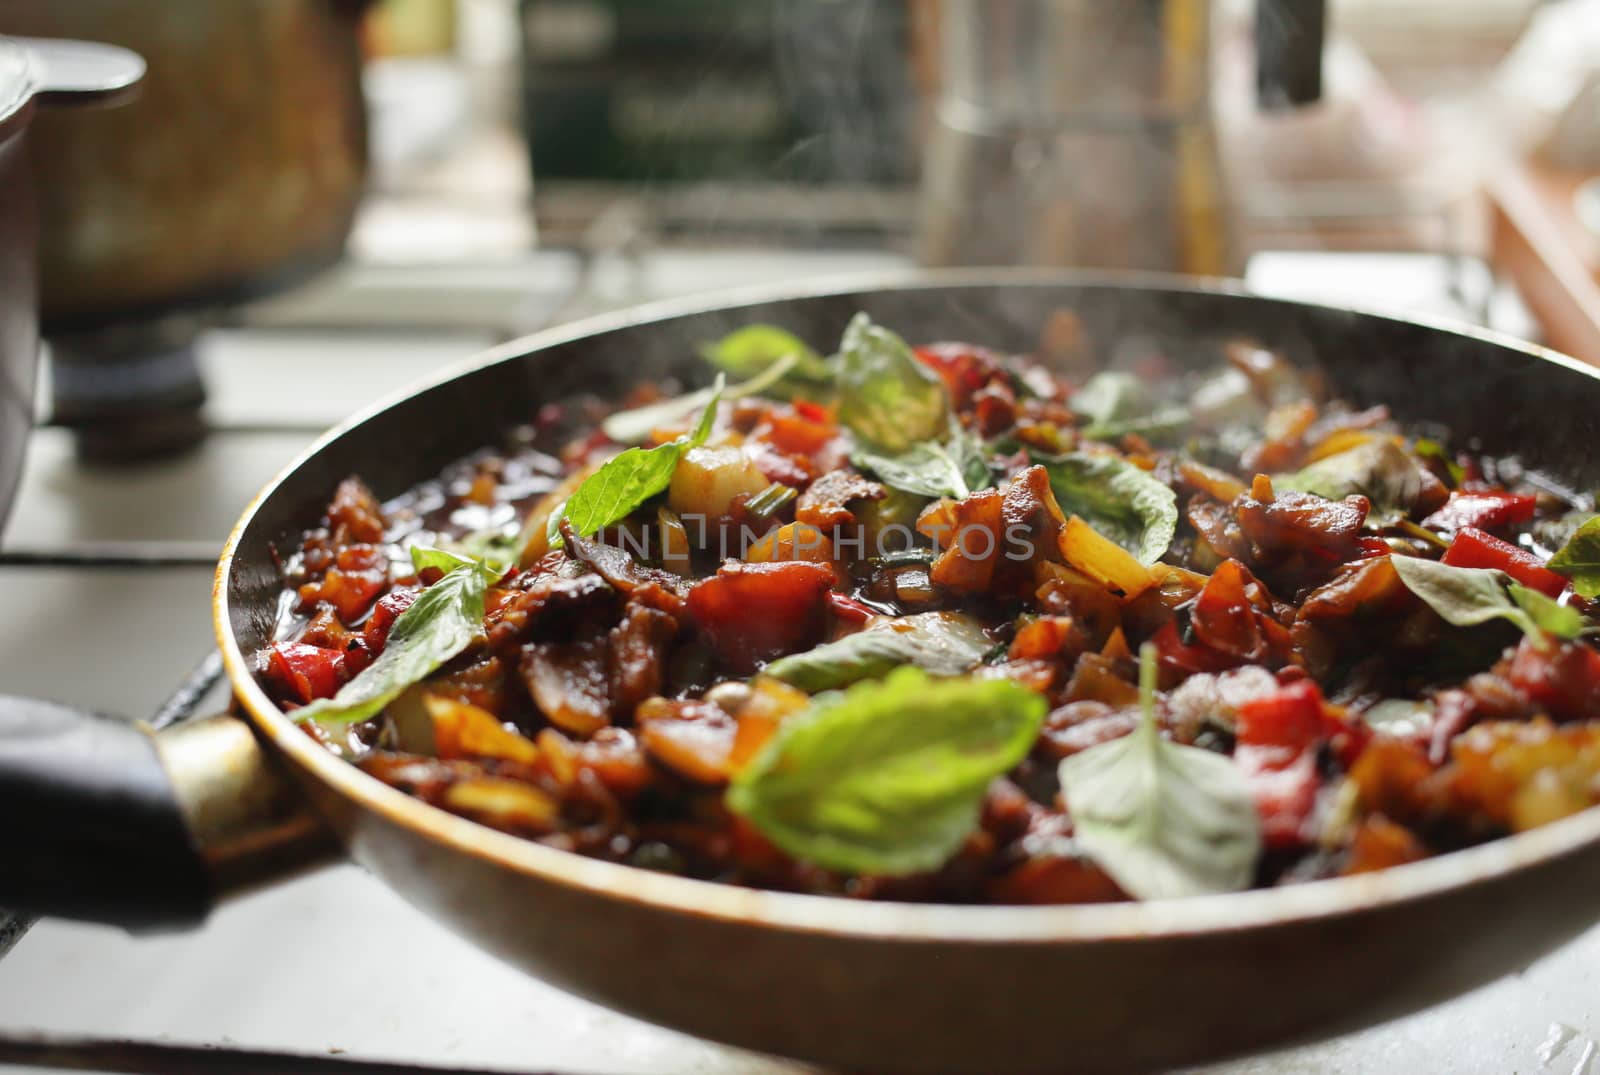 Healthy food, vegetables are fried in a pan. Tomato eggplant onion pepper zucchini basil. Steam